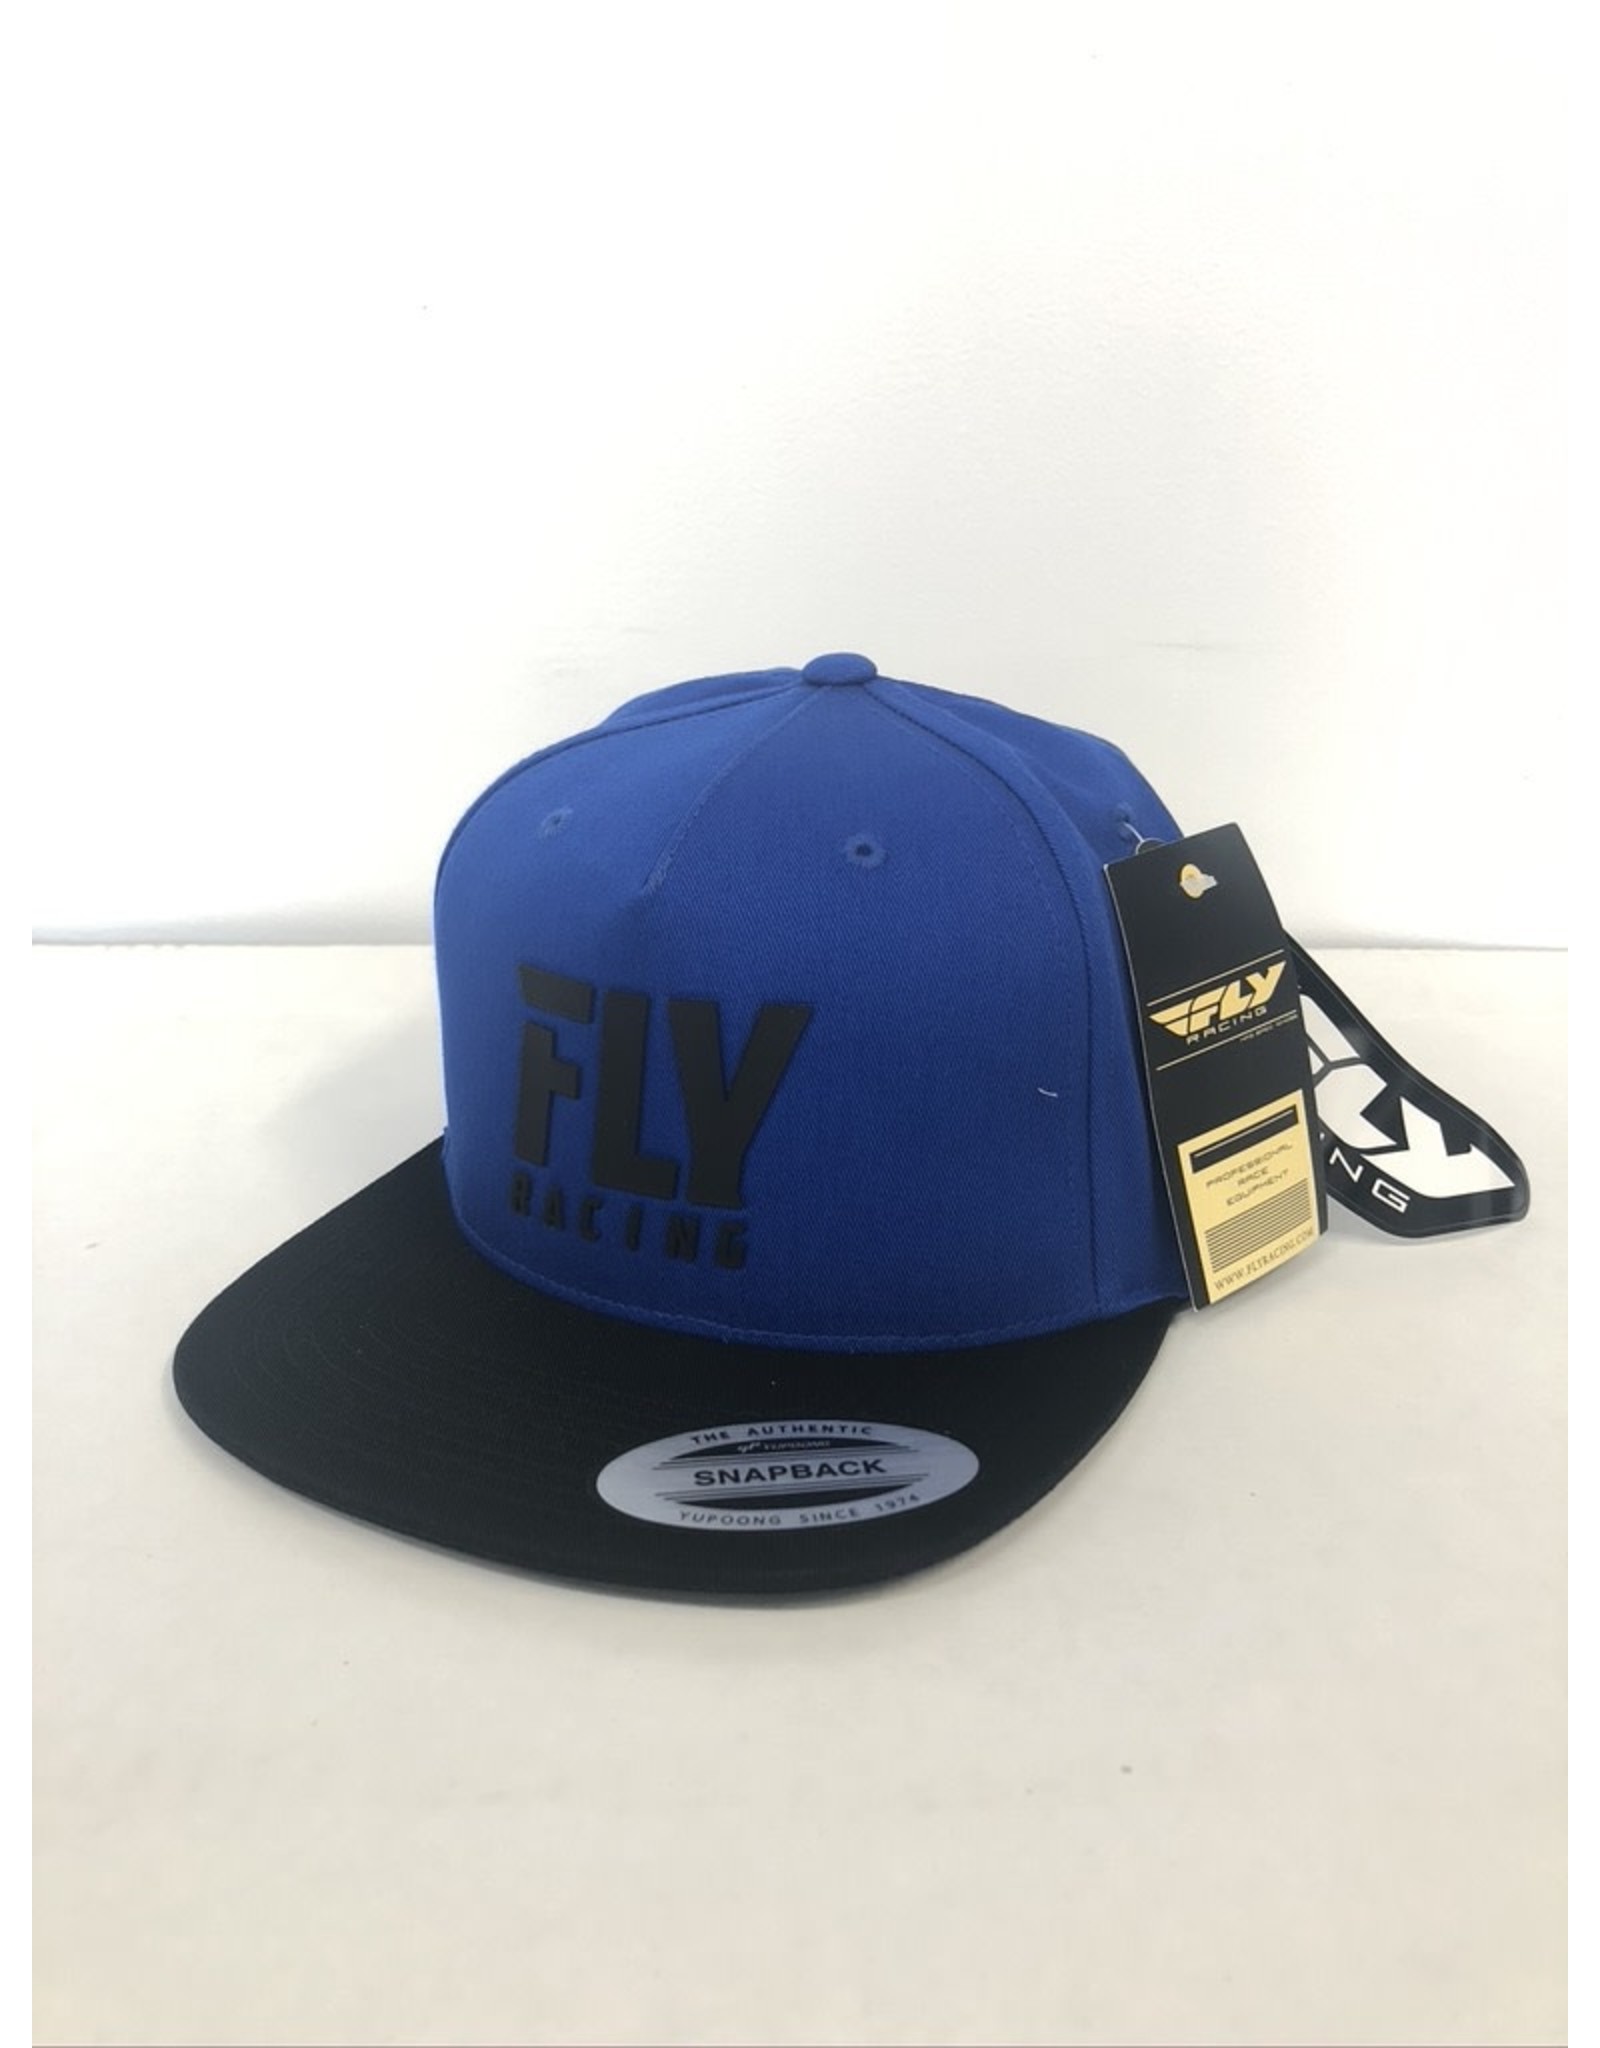 FLY RACING FLY LOGO HAT BLUE ADULT